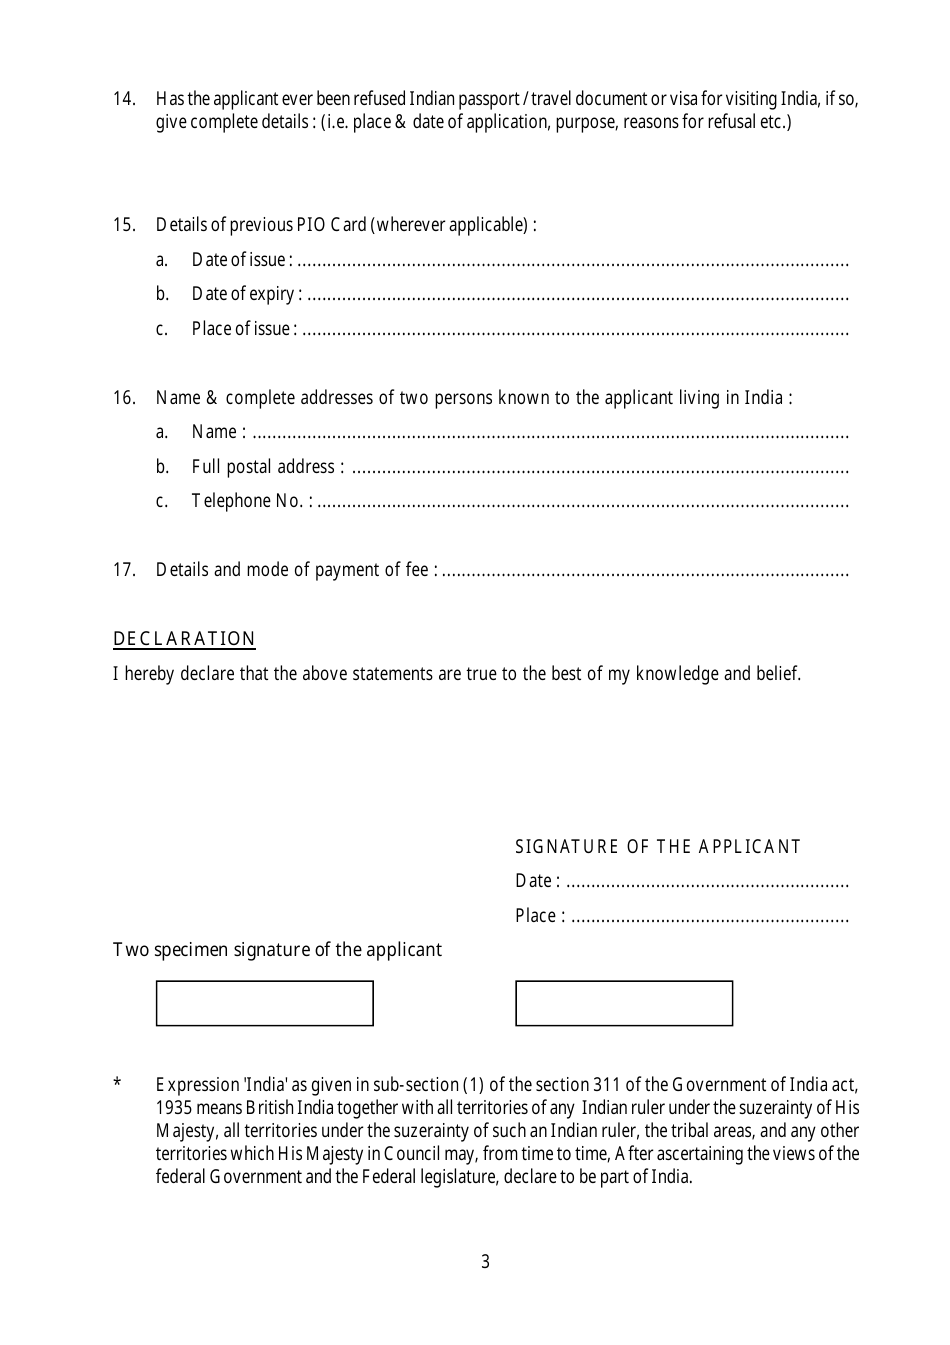 India Application Form for the Grant/Renewal of Pio Card - Embassy of ...